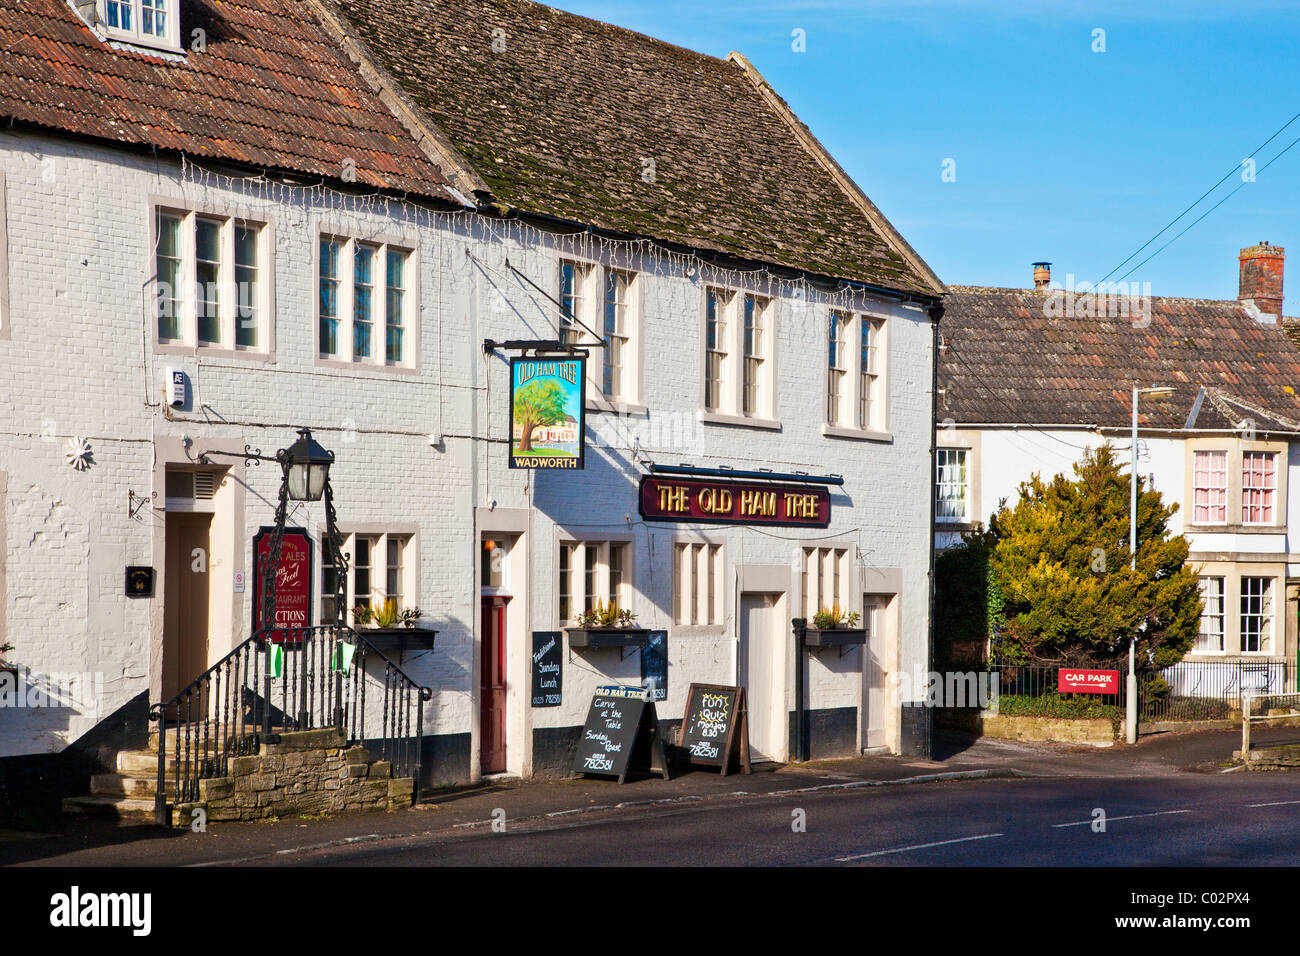 The Old Ham Tree a typical English country village pub or inn in the village of Holt, Wiltshire, England, UK Stock Photo